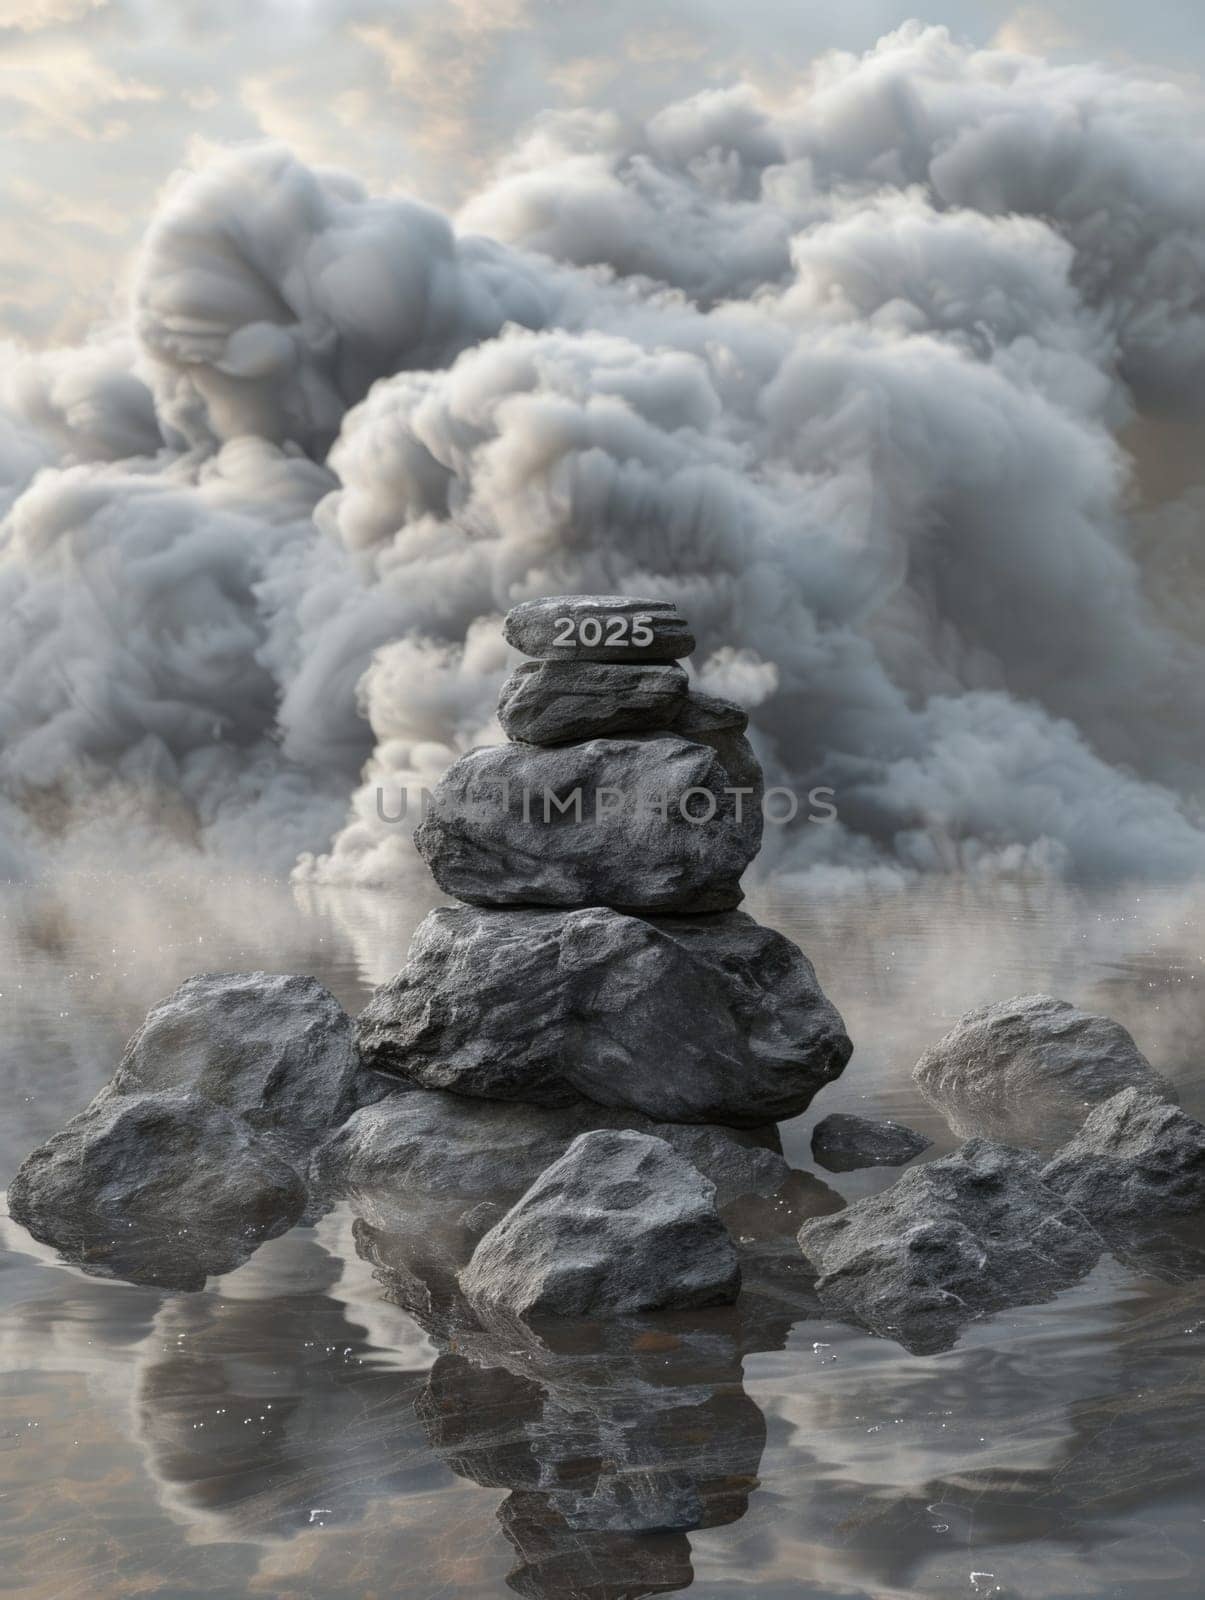 A stack of rocks balancing on the surface of a body of water, creating an interesting sight.